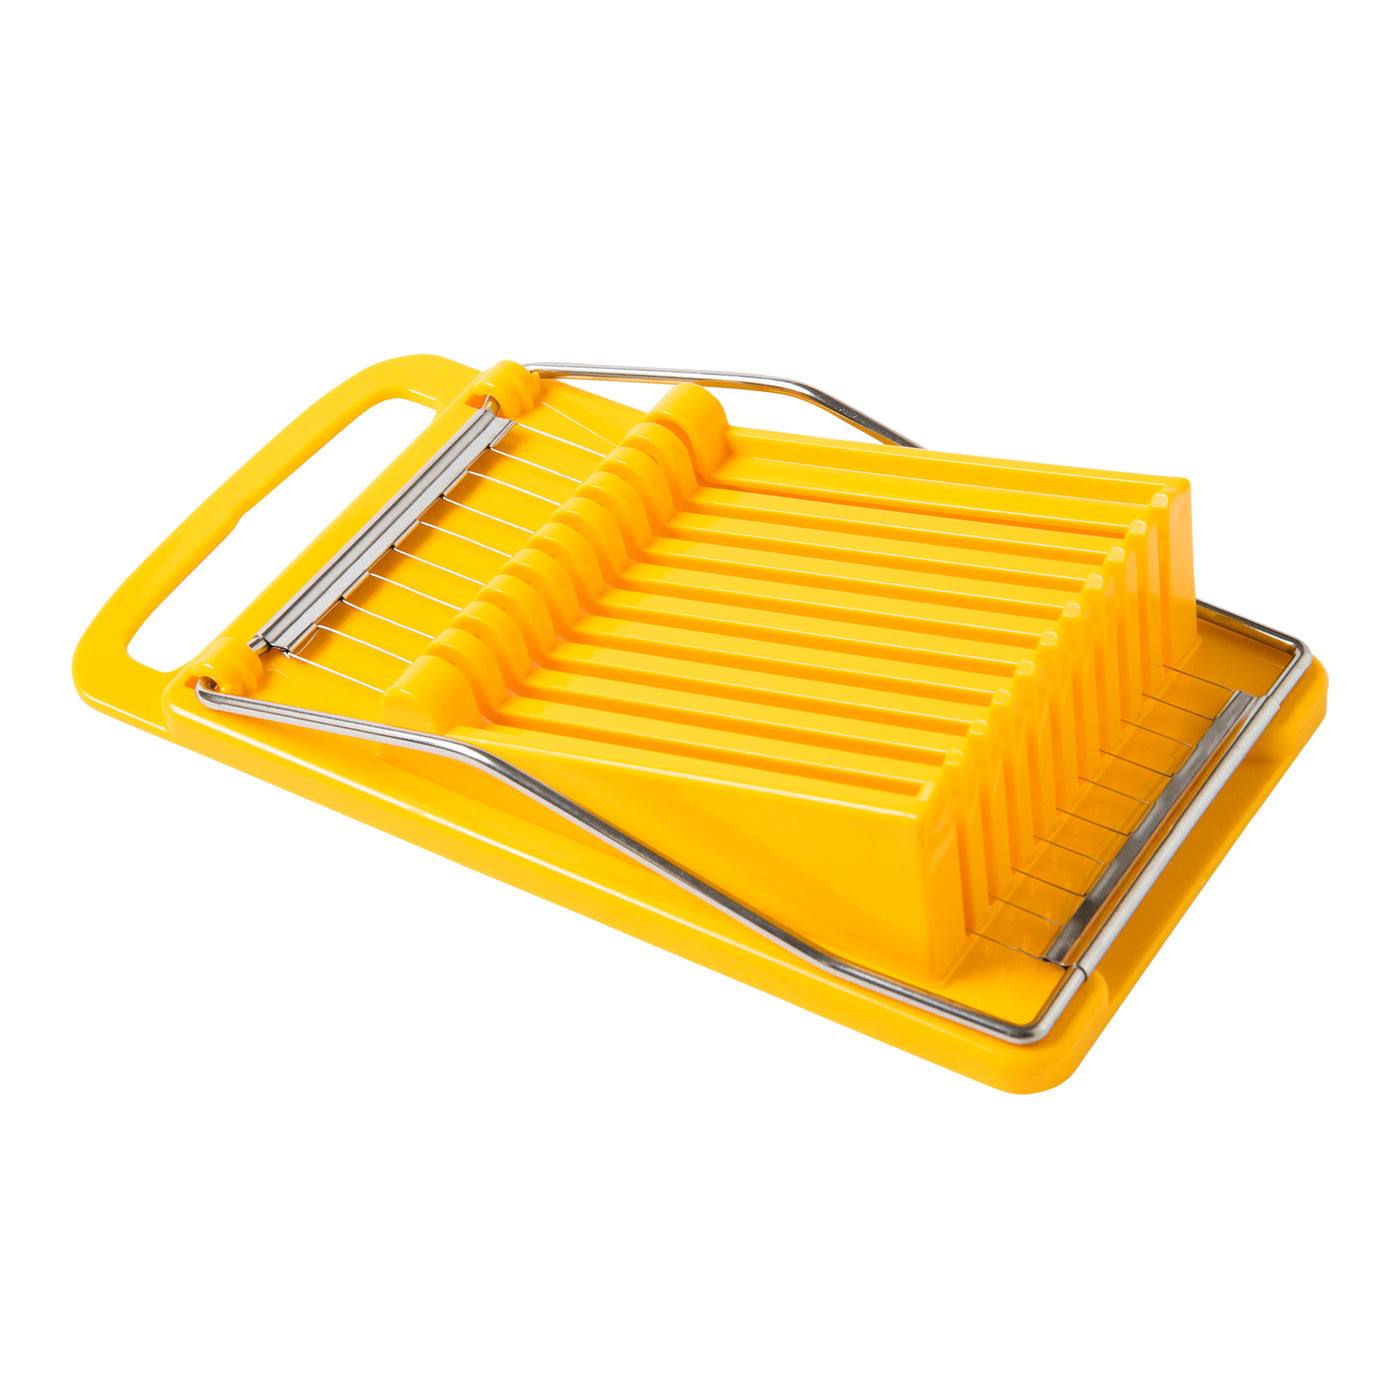 spam slicer bpa free material cheese